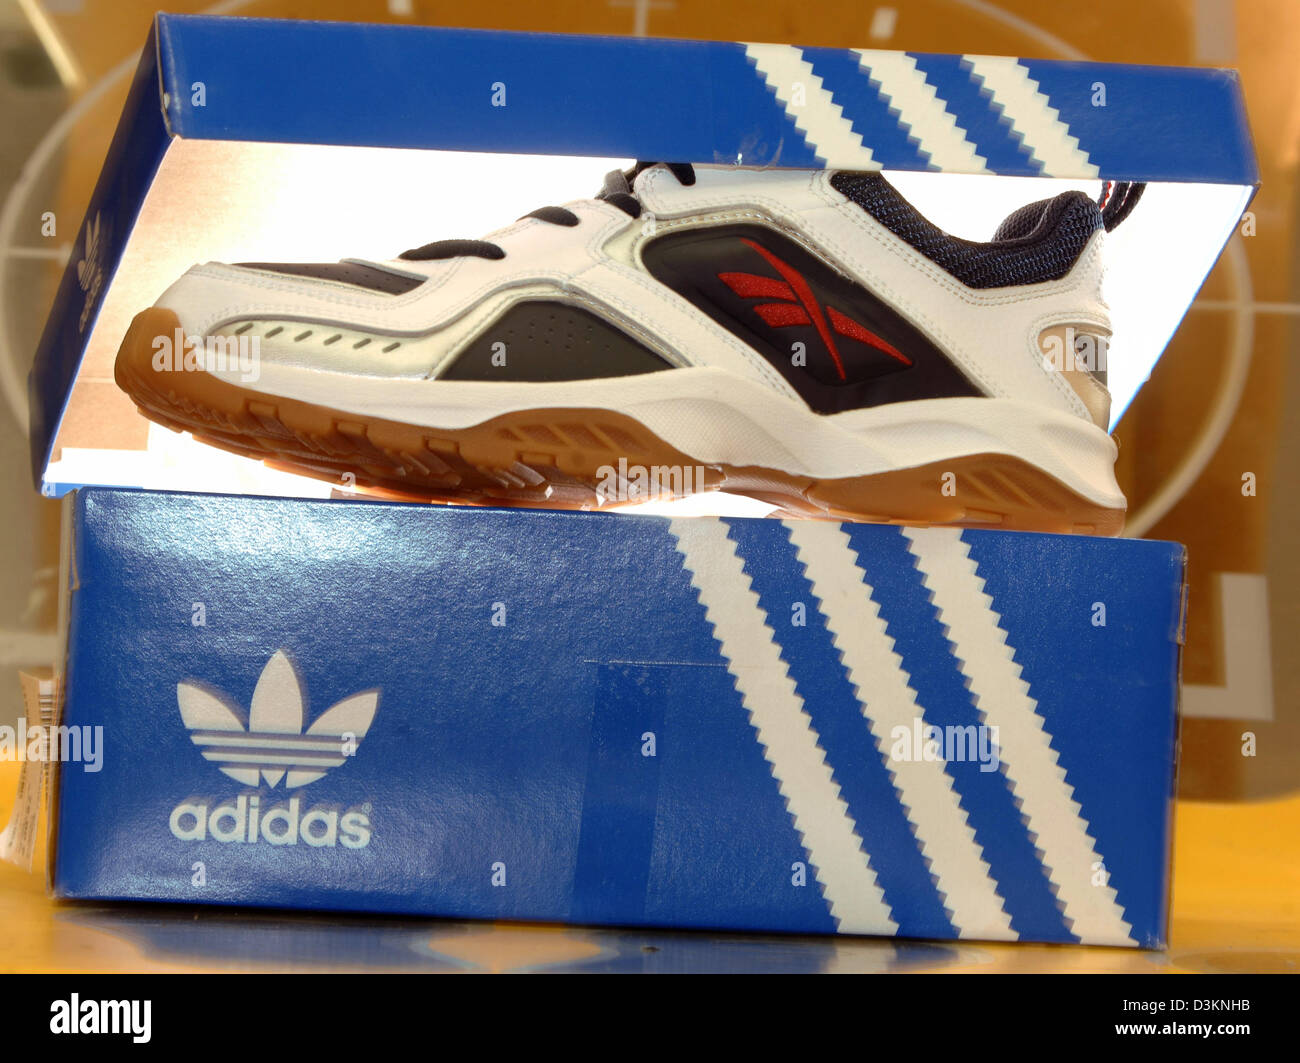 dpa) - The picture shows a Reebok sneaker in an Adidas shoe box in a  sporting goods store in Munich, Germany, Wednesday 03 August 2005. In order  to bridge the gap to